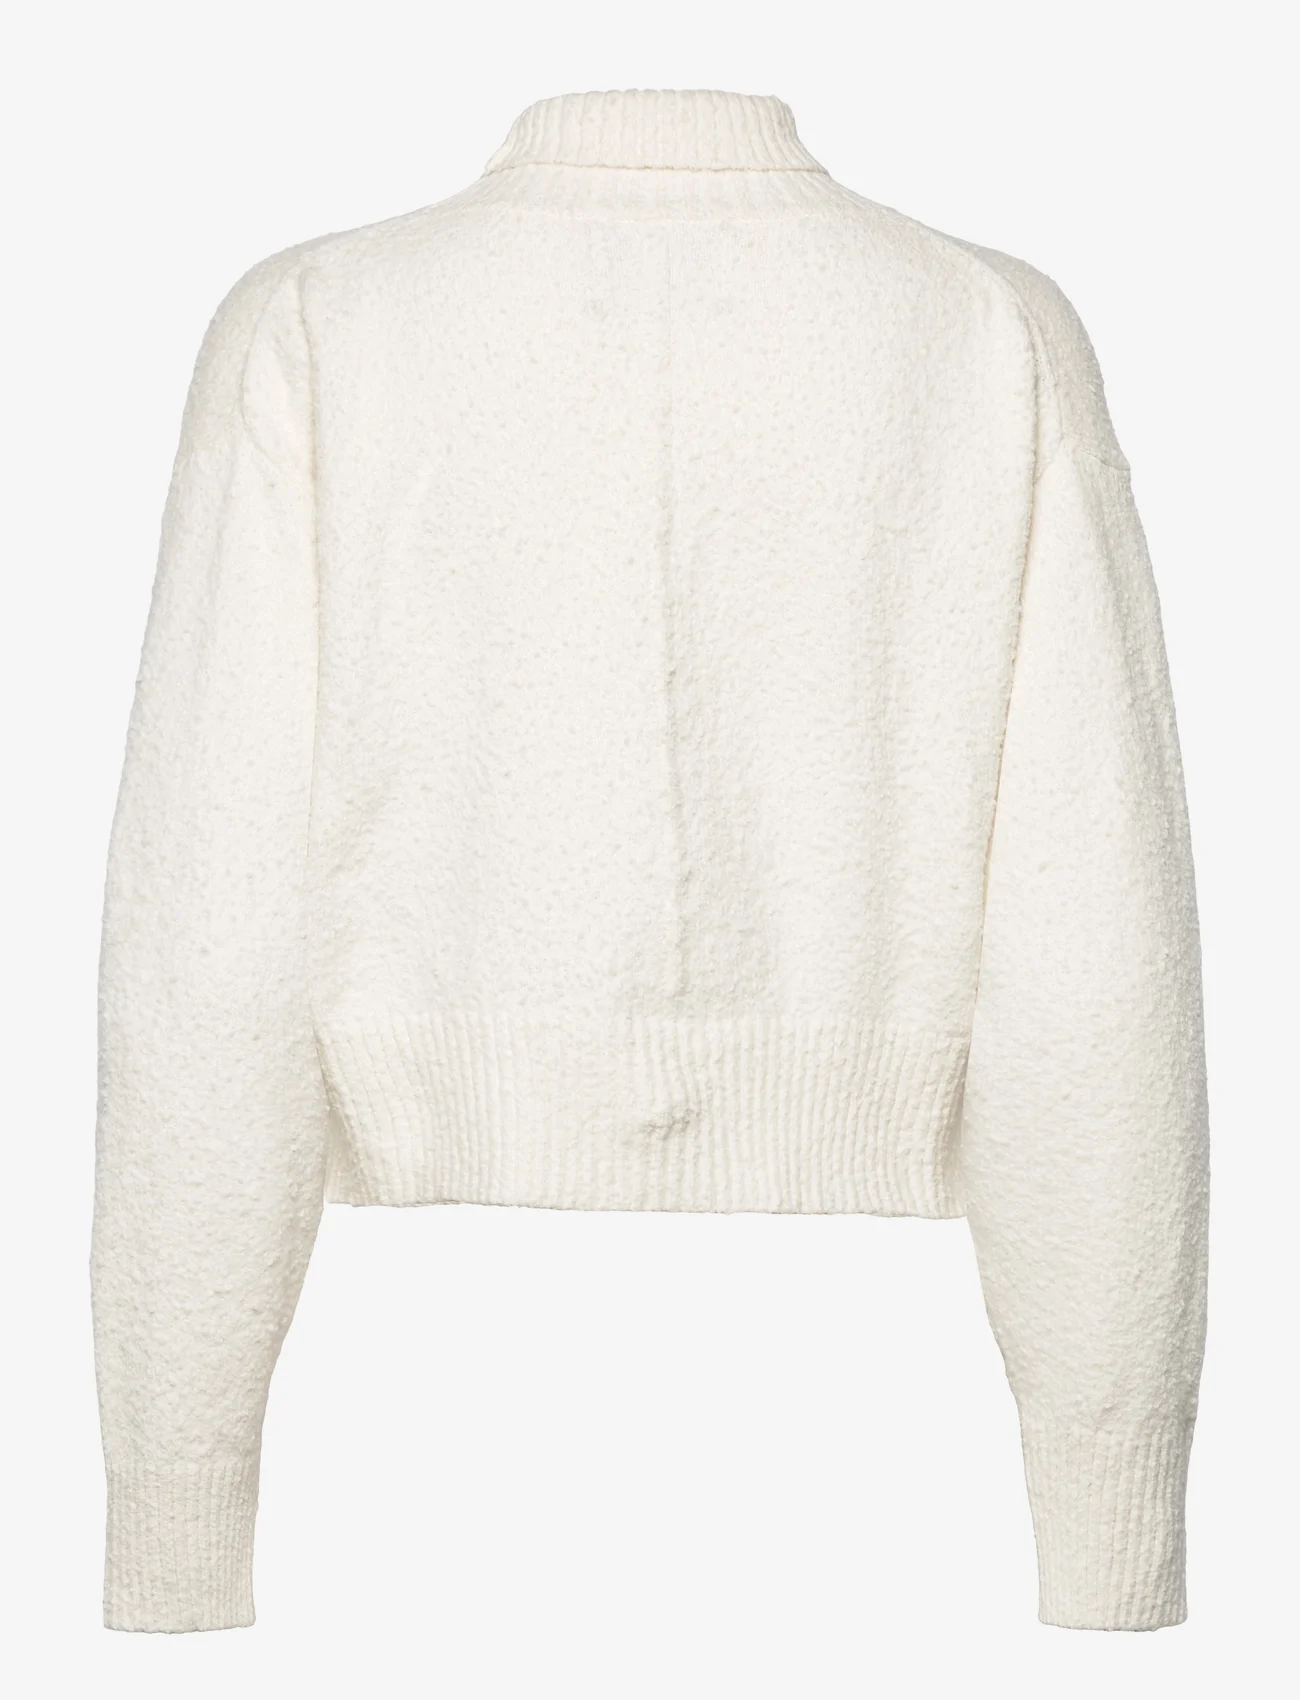 Calvin Klein Jeans - BOUCLE HIGH NECK SWEATER - trøjer - ivory - 1